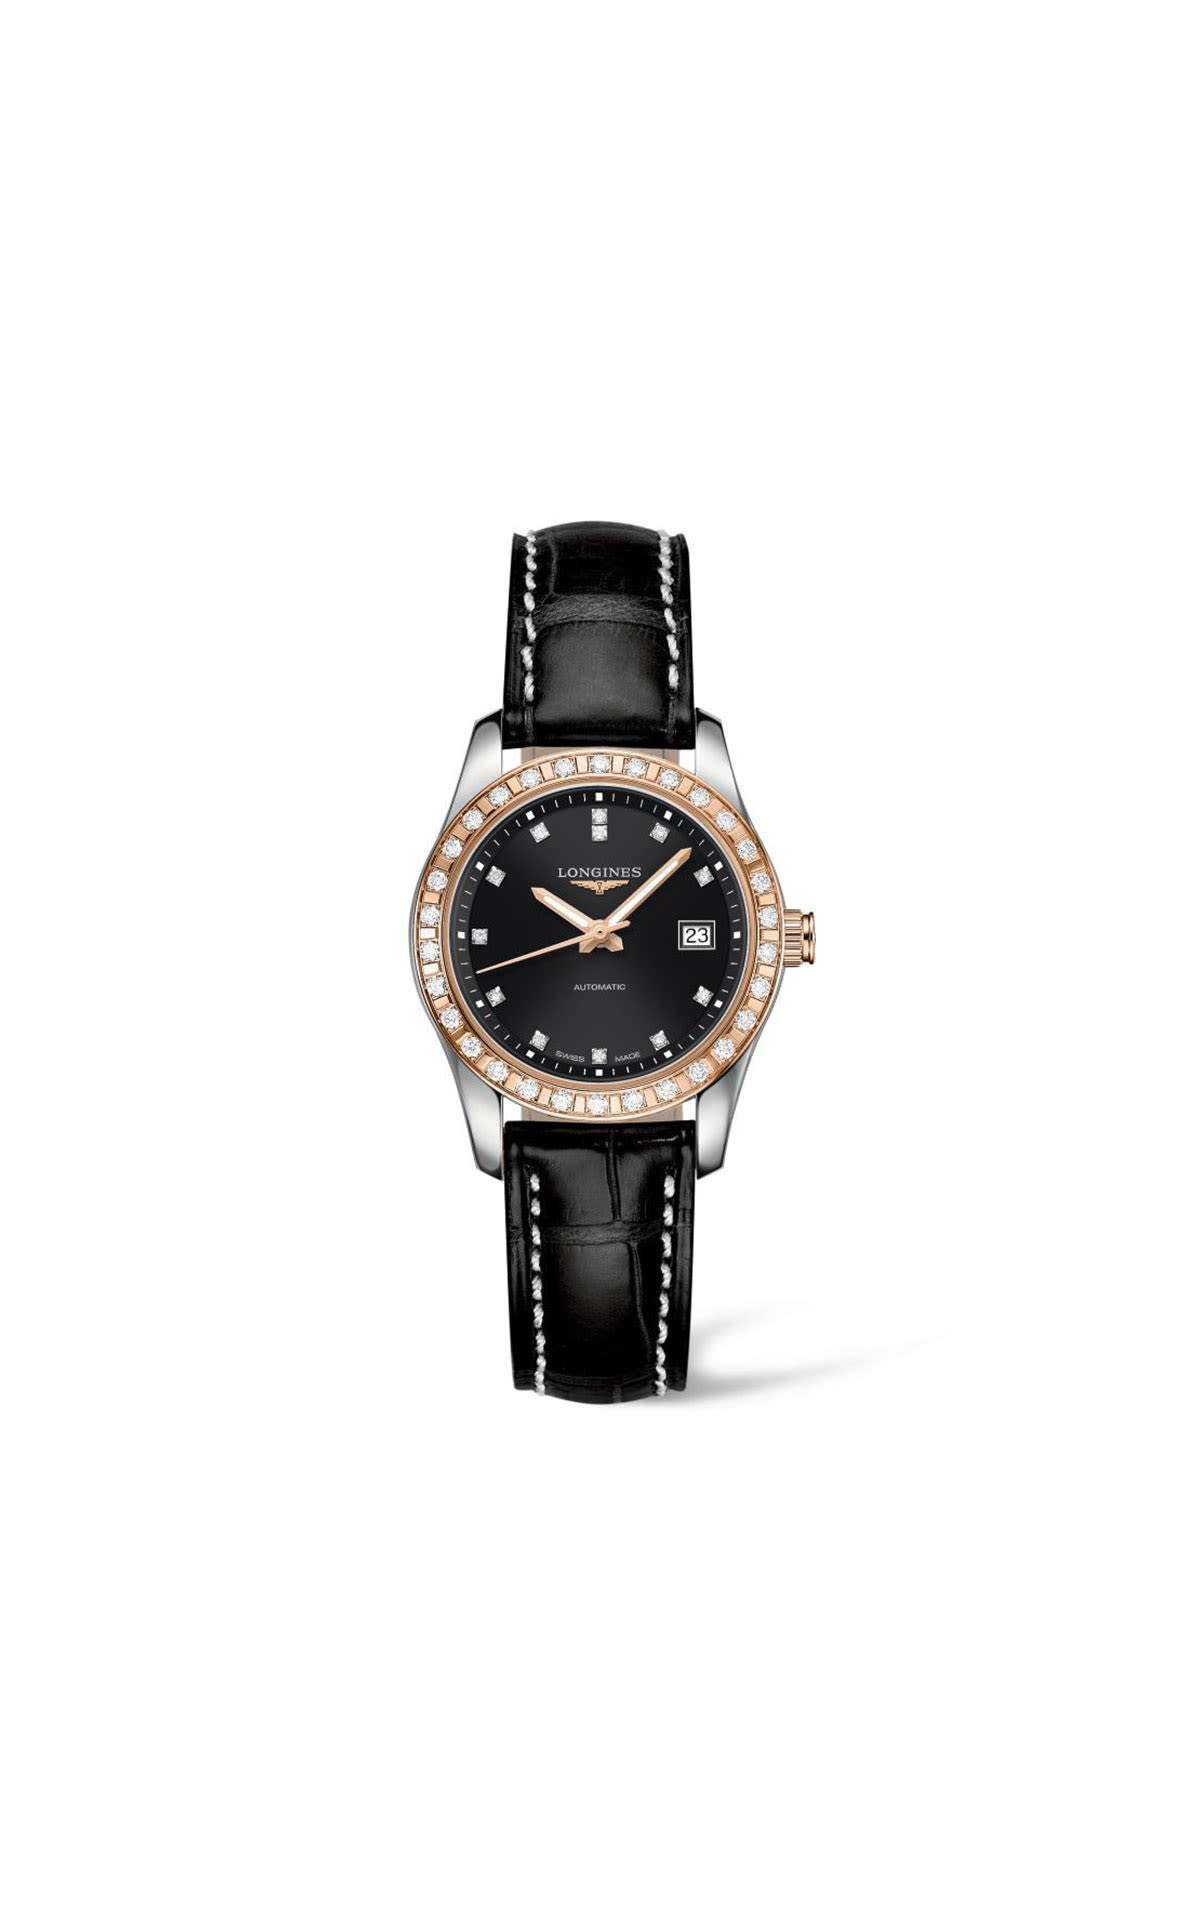 Hour Passion The Longines Conquest Classic Automatic Collection from Bicester Village